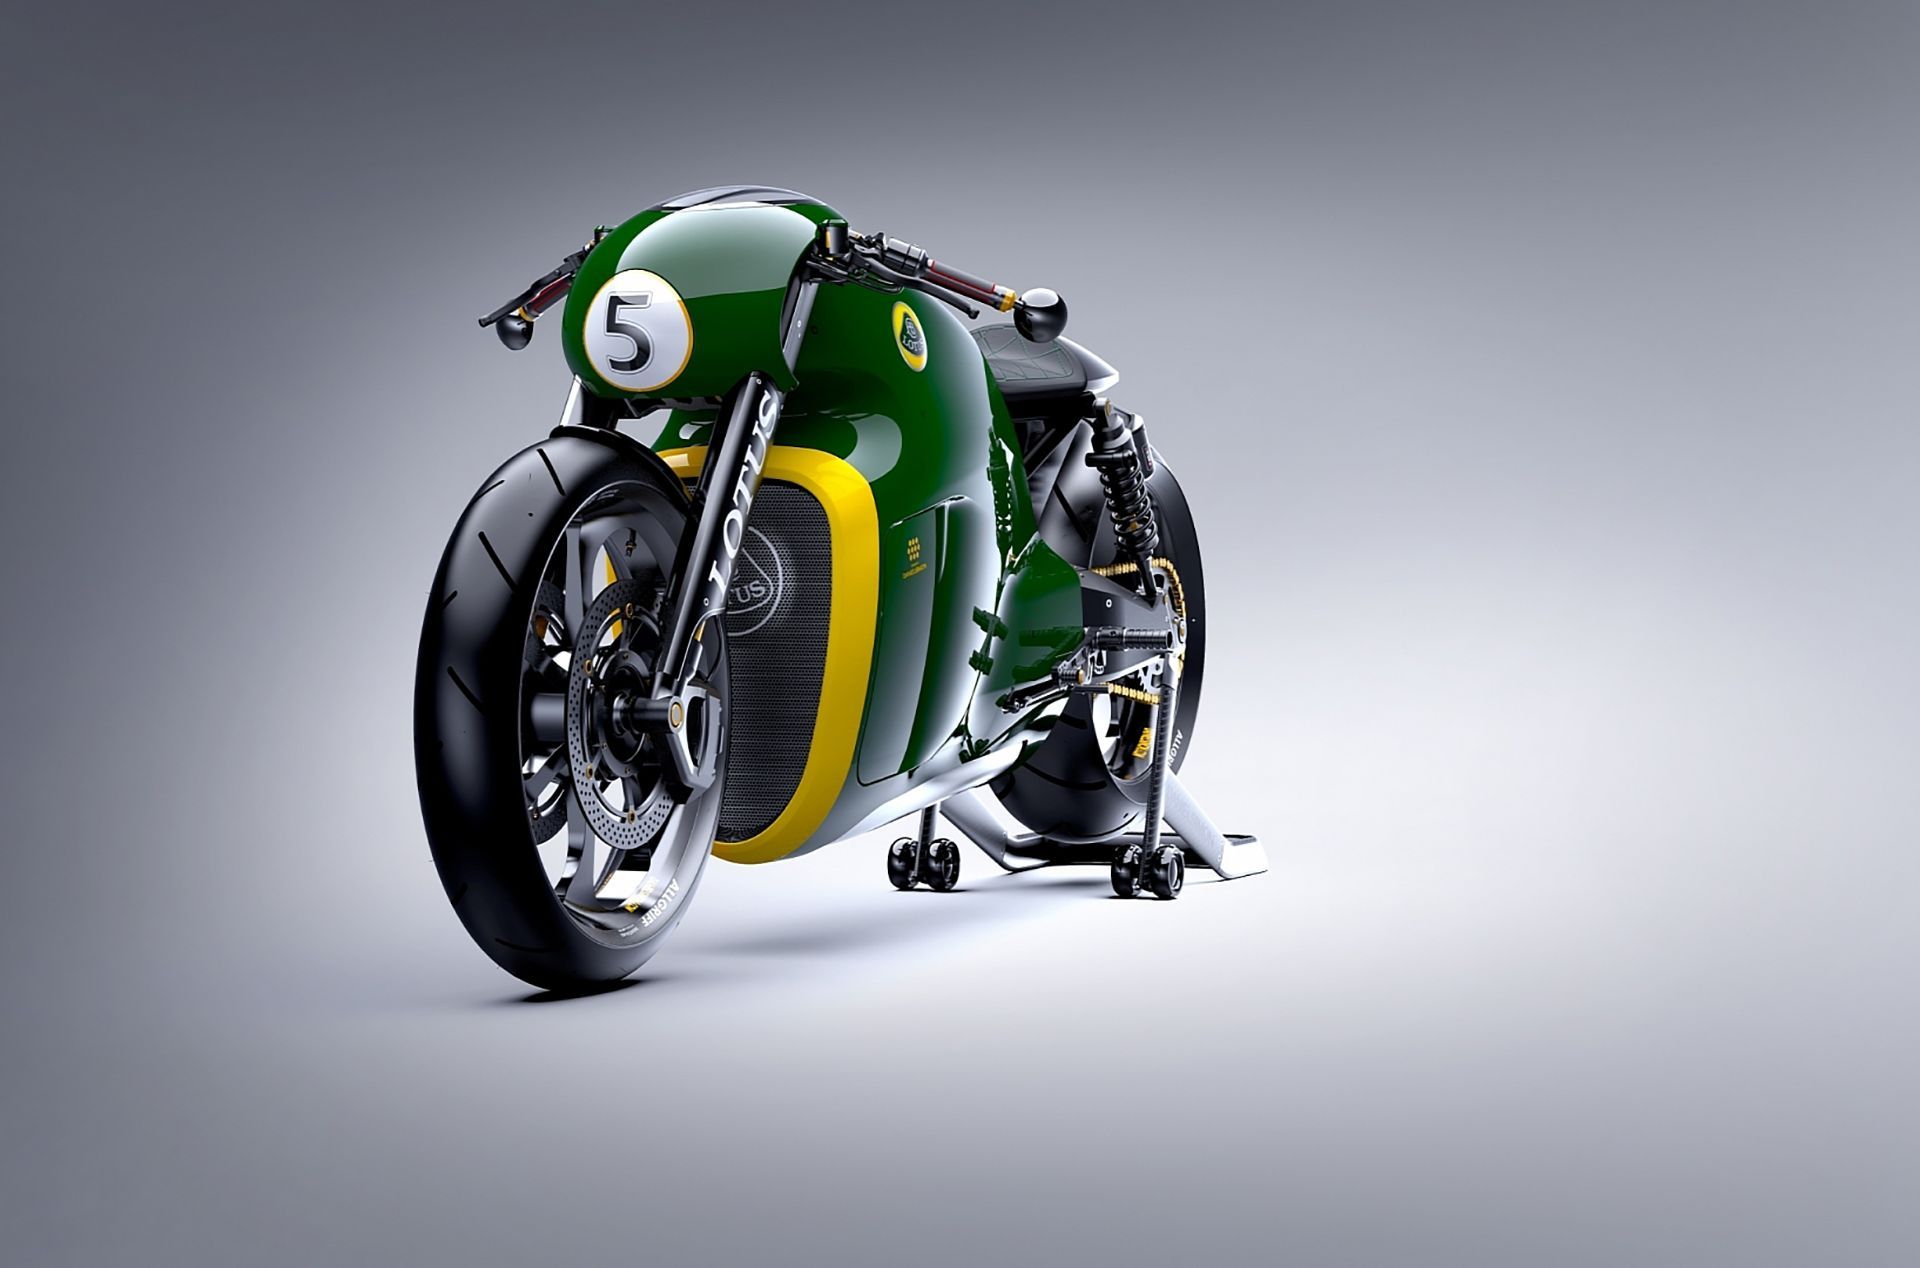 Lotus C-01 Motorcycle Wallpapers and Images | Cool Wallpapers